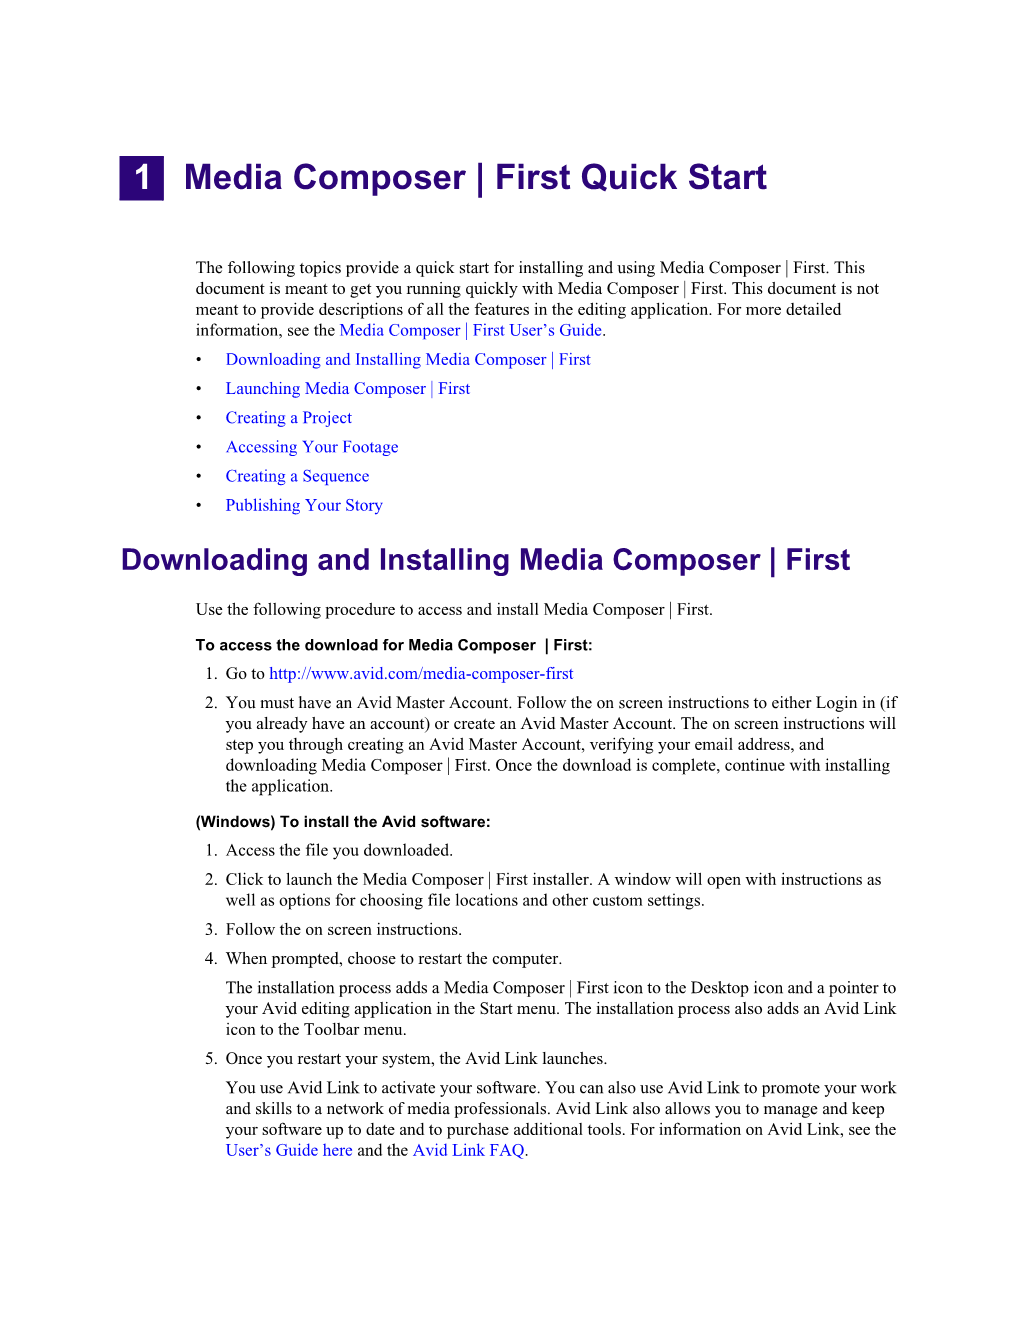 Media Composer First Getting Started